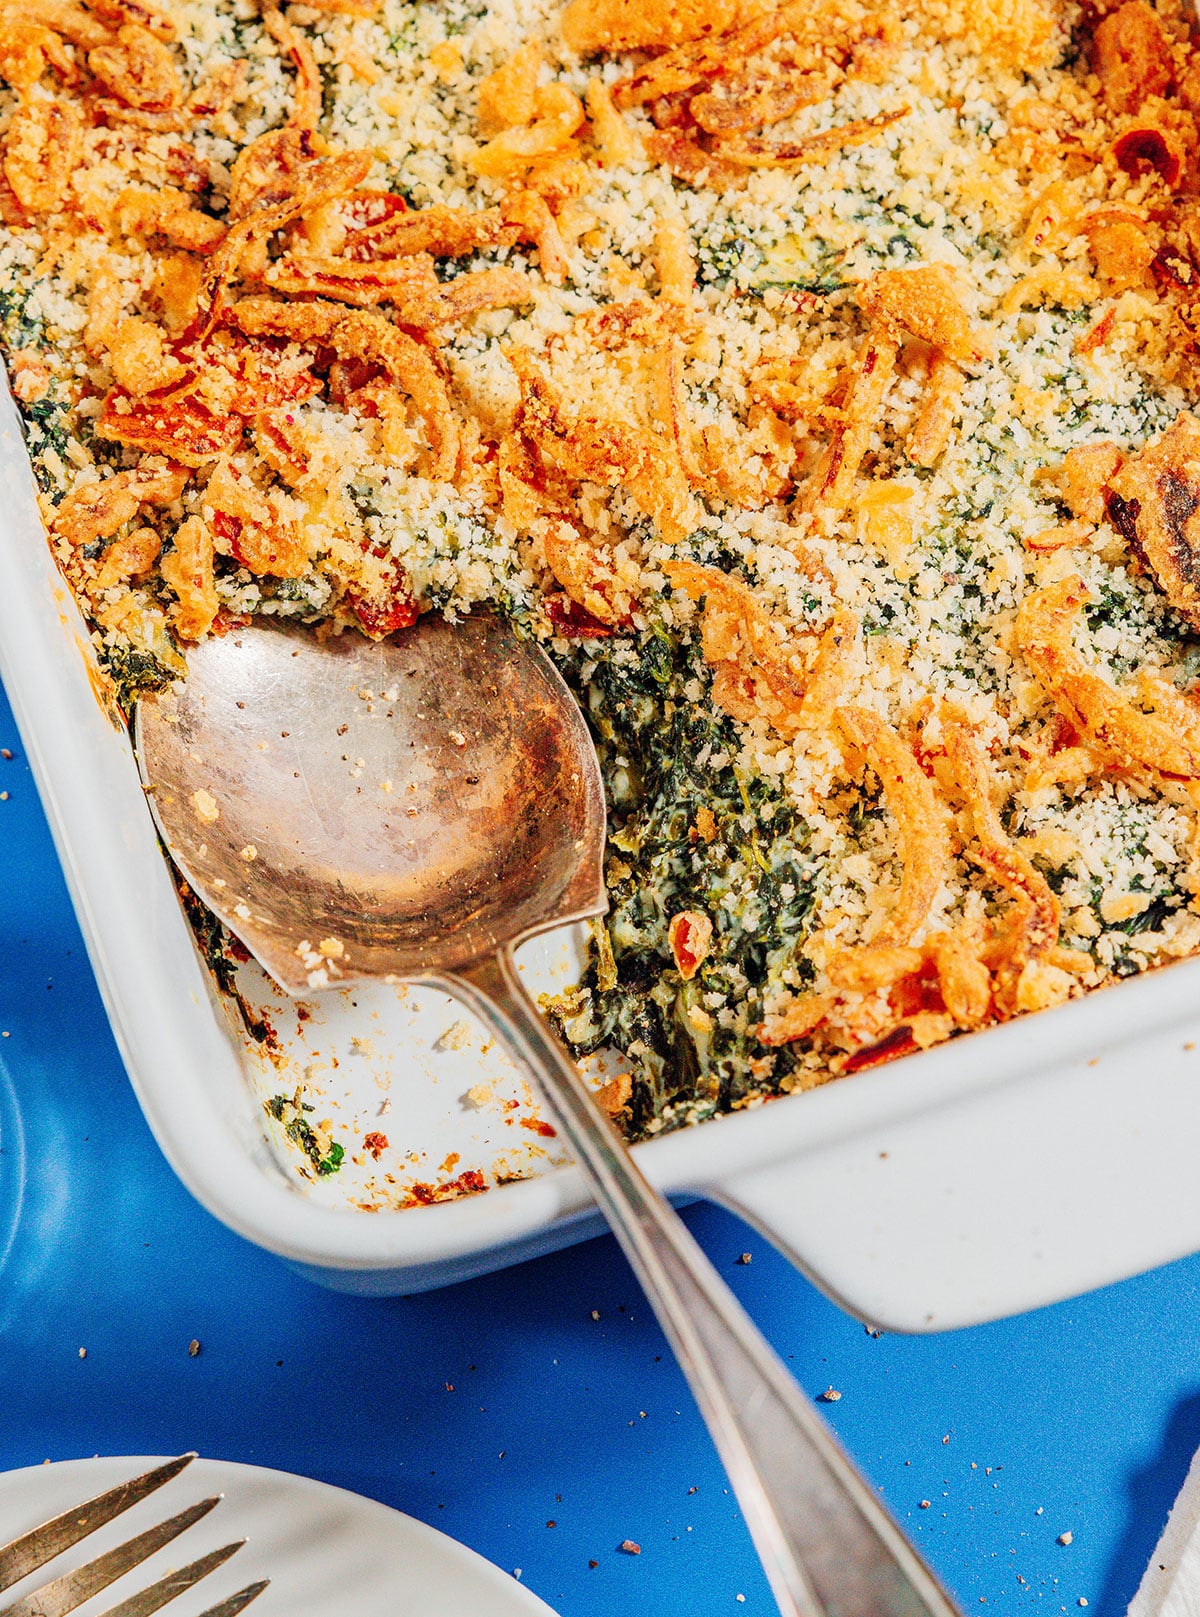 Spinach casserole in a baking dish with a spoon.